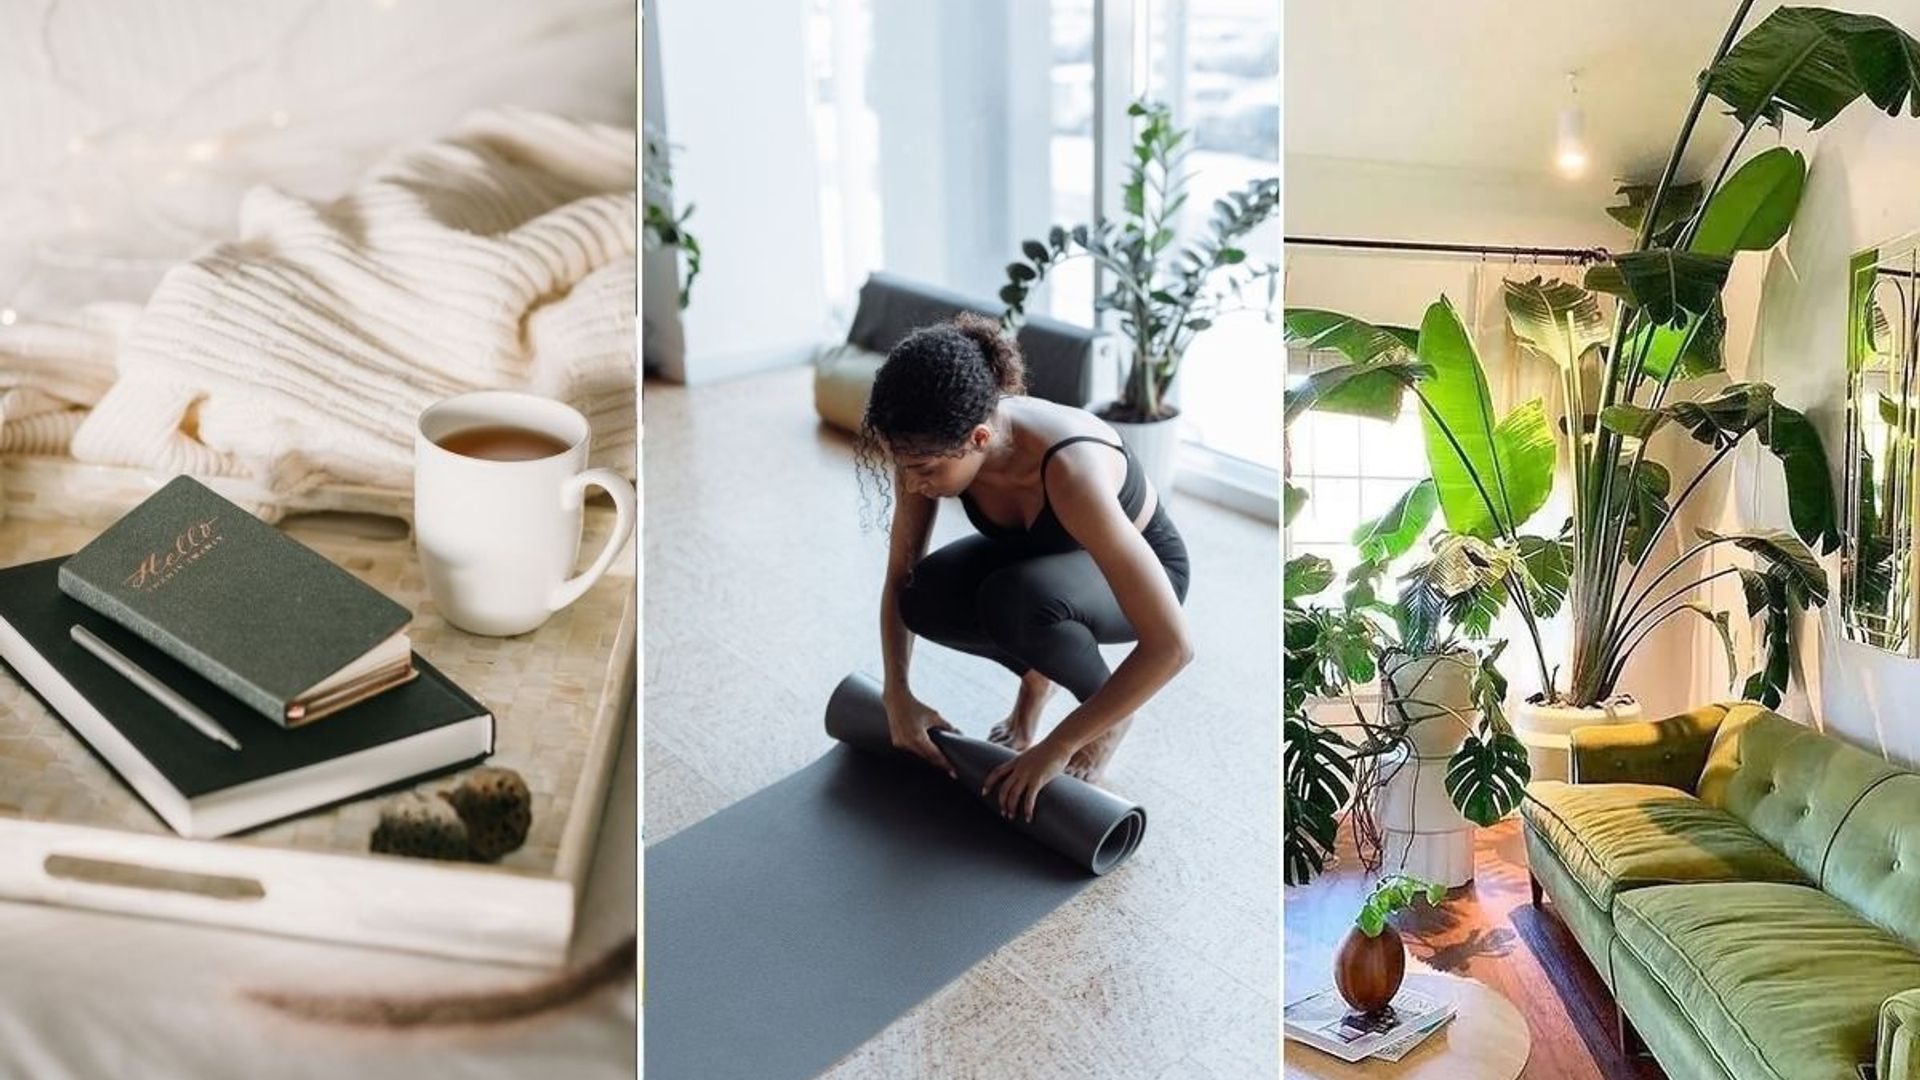 15 wellness trends to try in 2022 that will help manage your anxiety